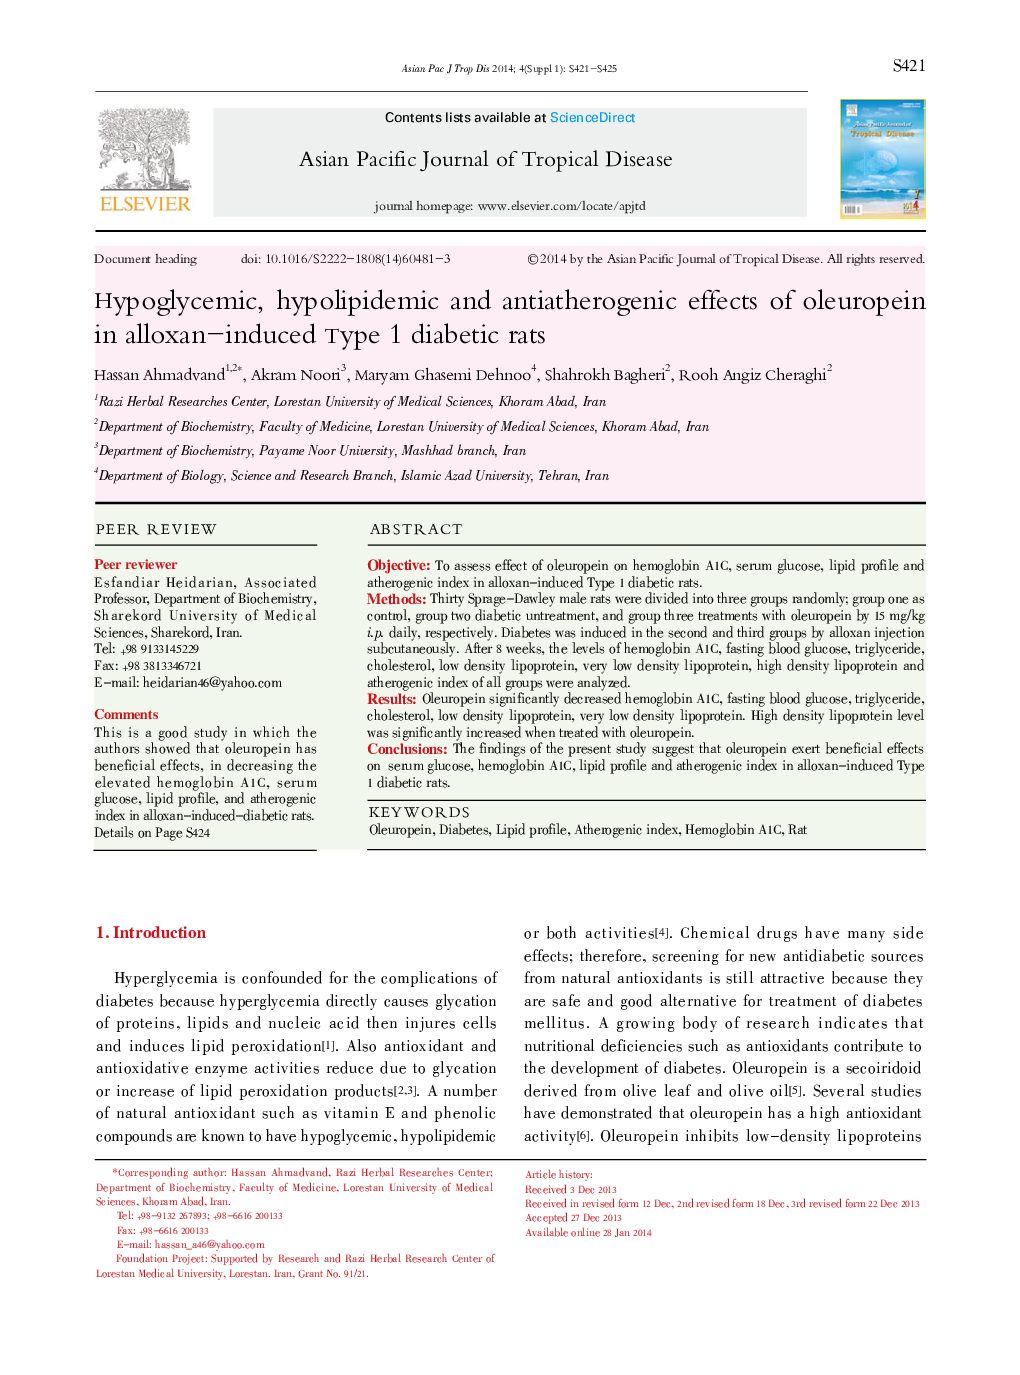 Hypoglycemic, hypolipidemic and antiatherogenic effects of oleuropein in alloxan-induced Type 1 diabetic rats 